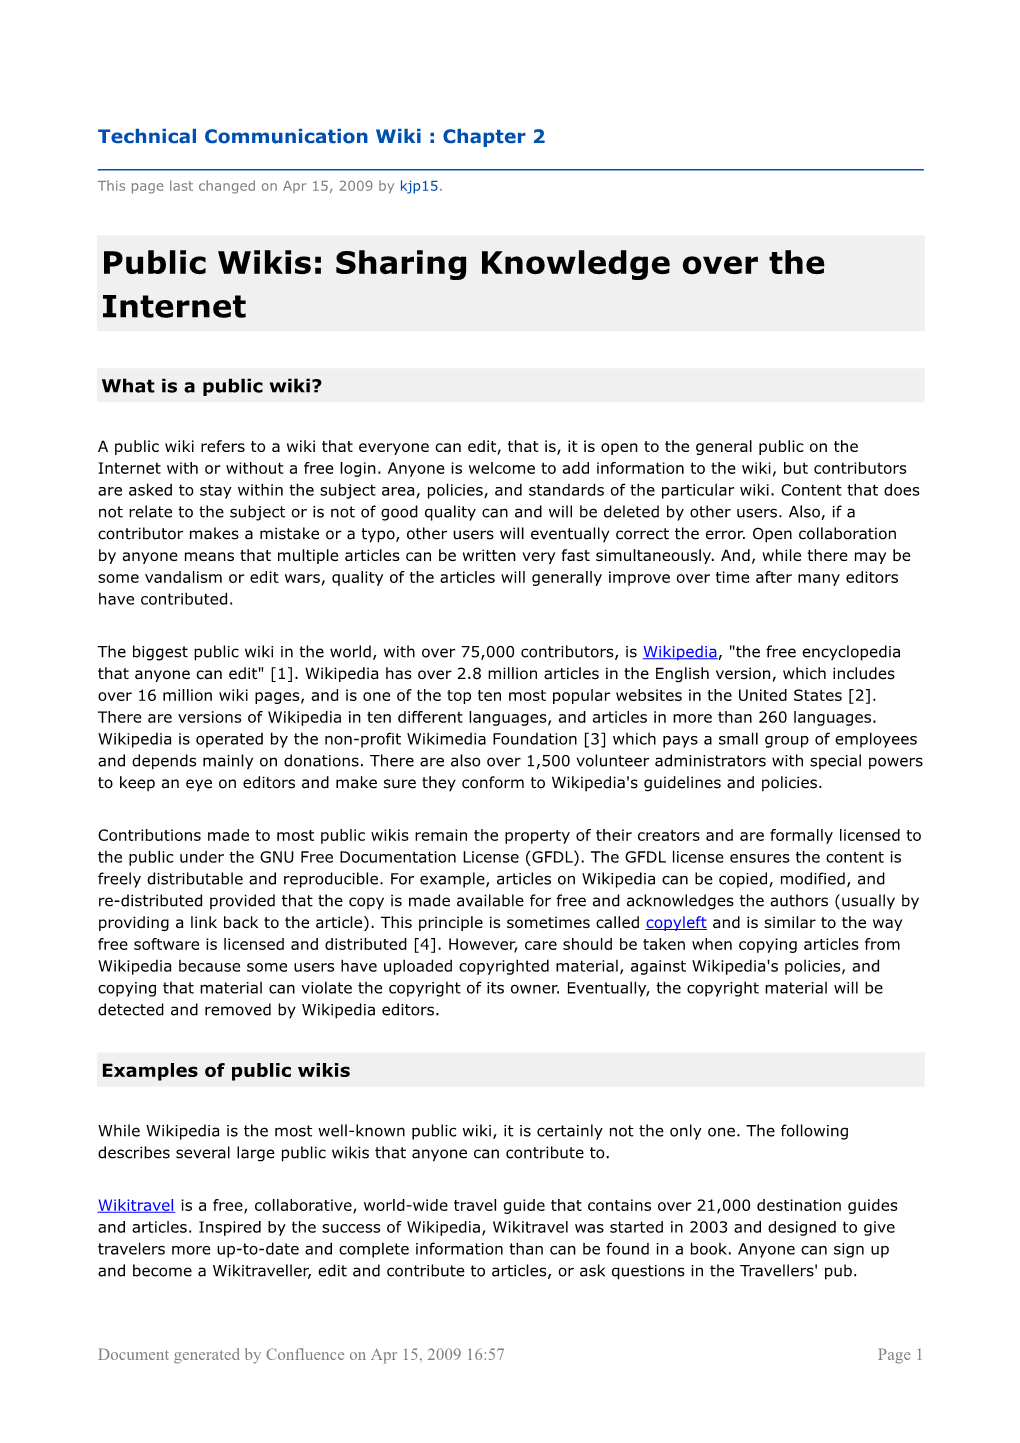 Public Wikis: Sharing Knowledge Over the Internet